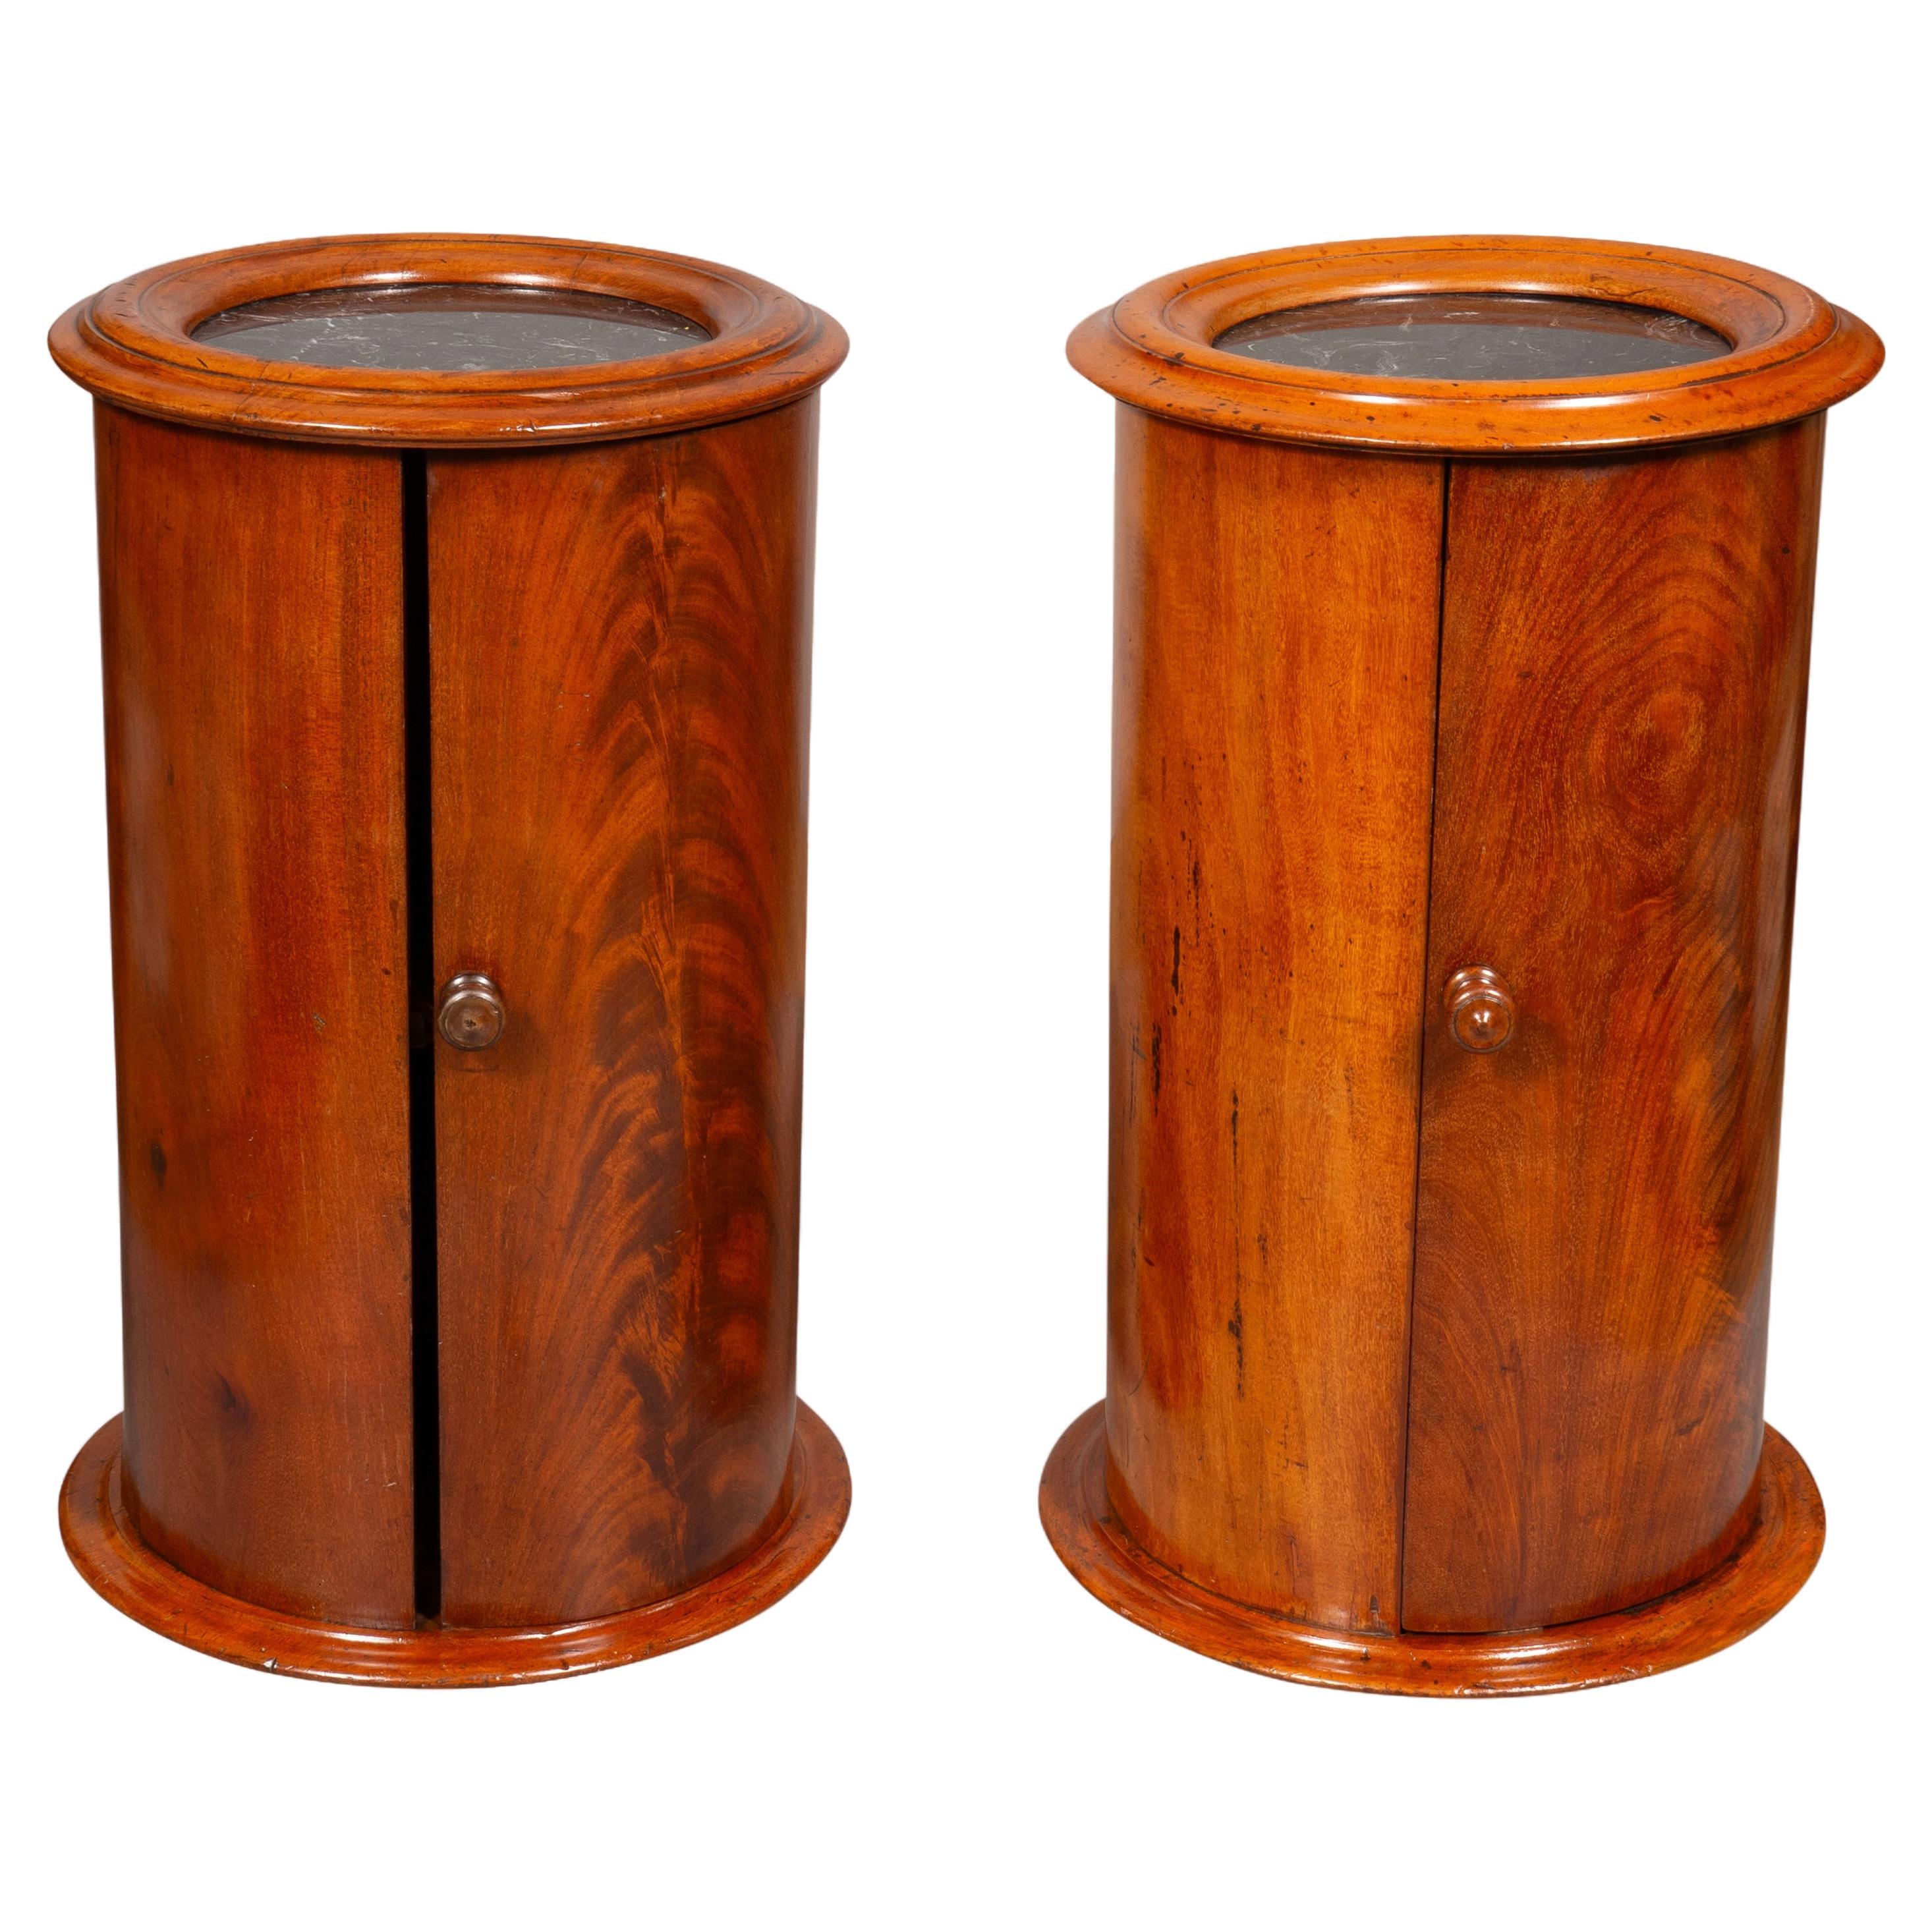 Pair Of Victorian Cylindrical Bedside Cabinets